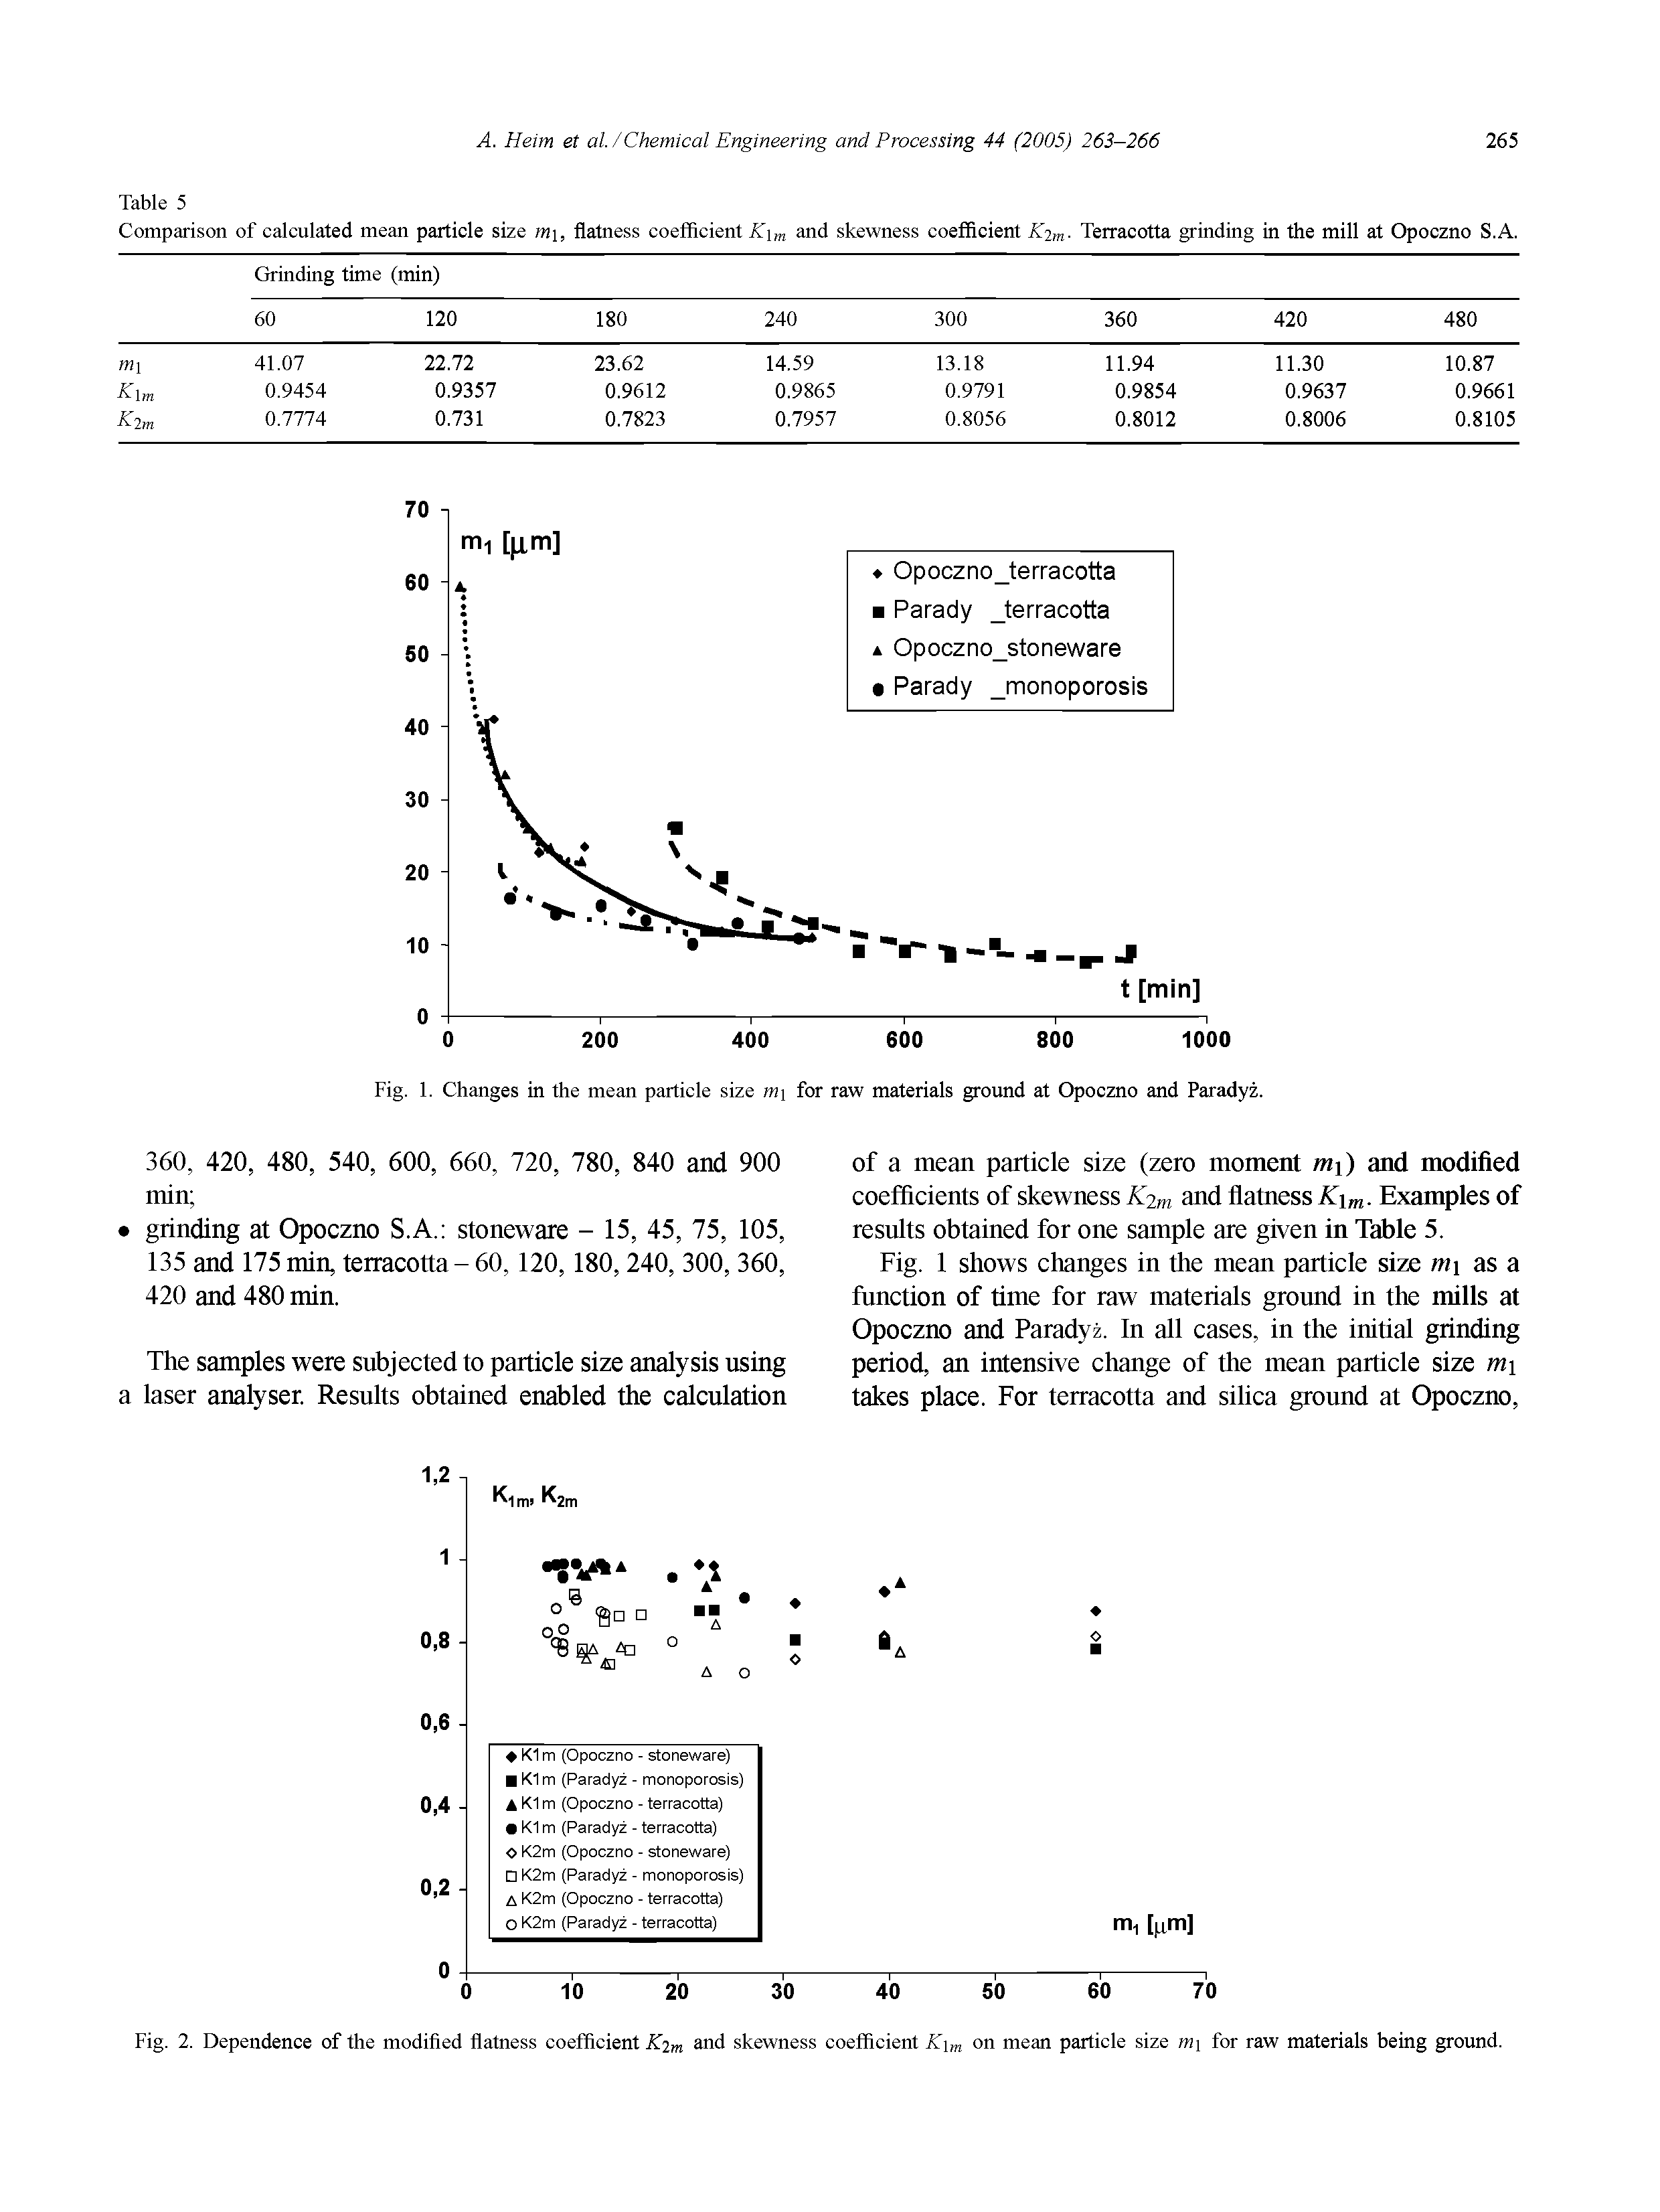 Fig. 2. Dependence of the modified flatness coefficient Kim and skewness coefficient K m on mean particle size m for raw materials being ground.